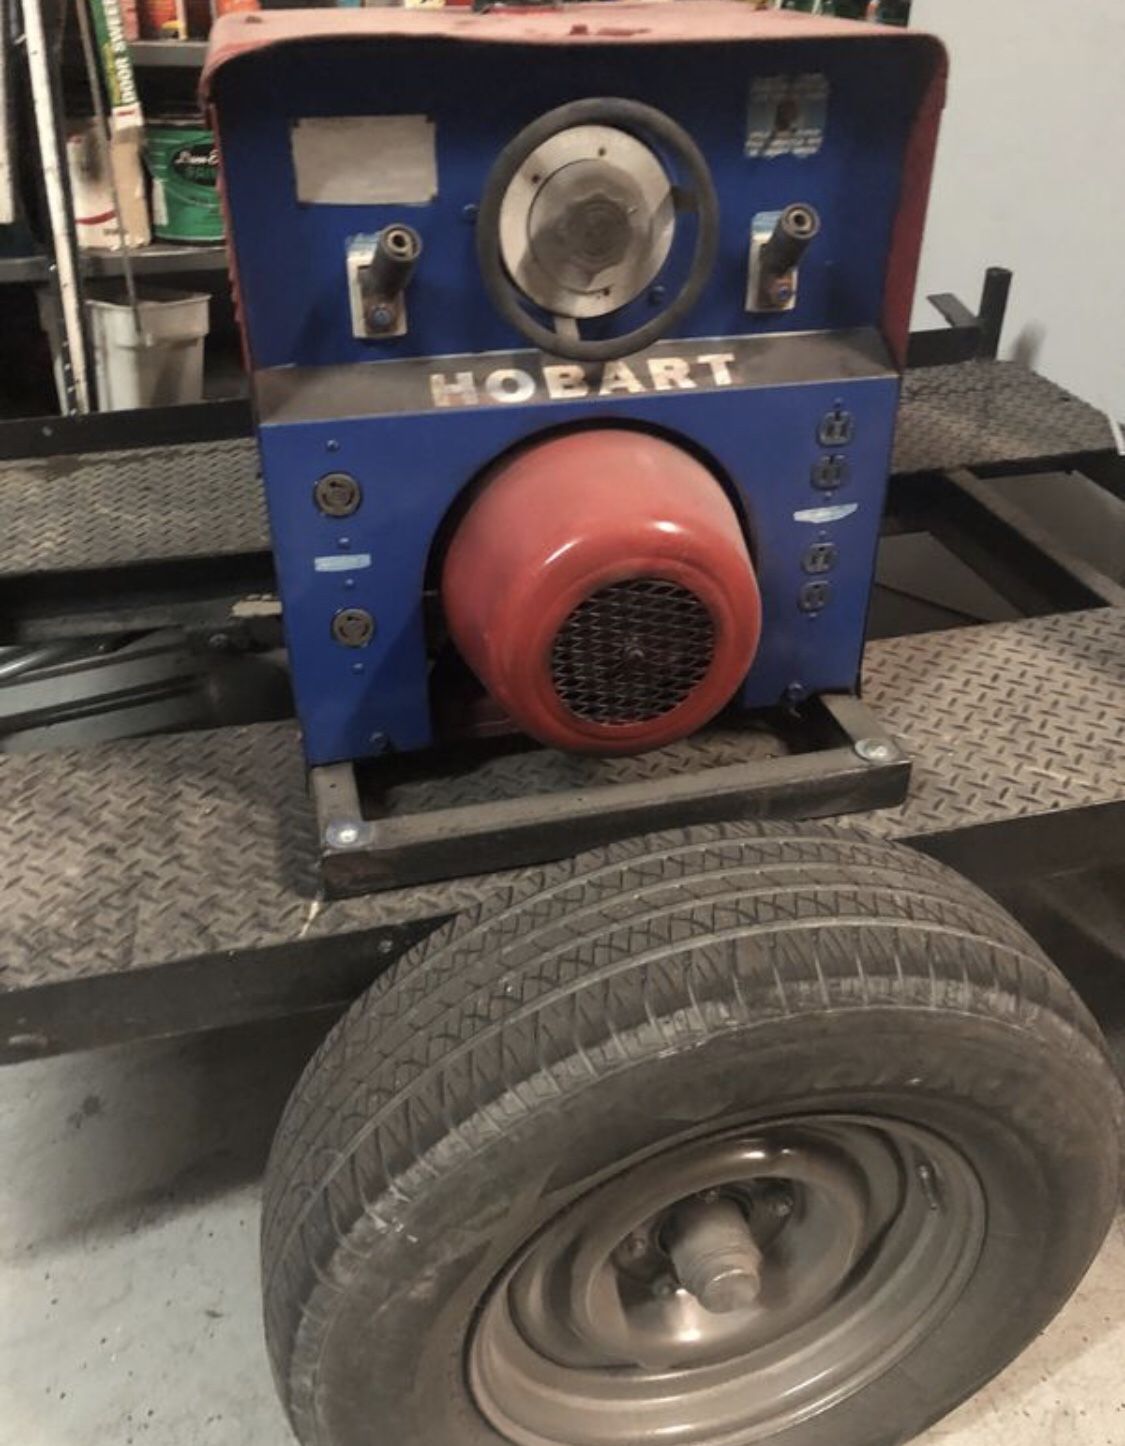 Welder /gas included trailer and tool box power generator